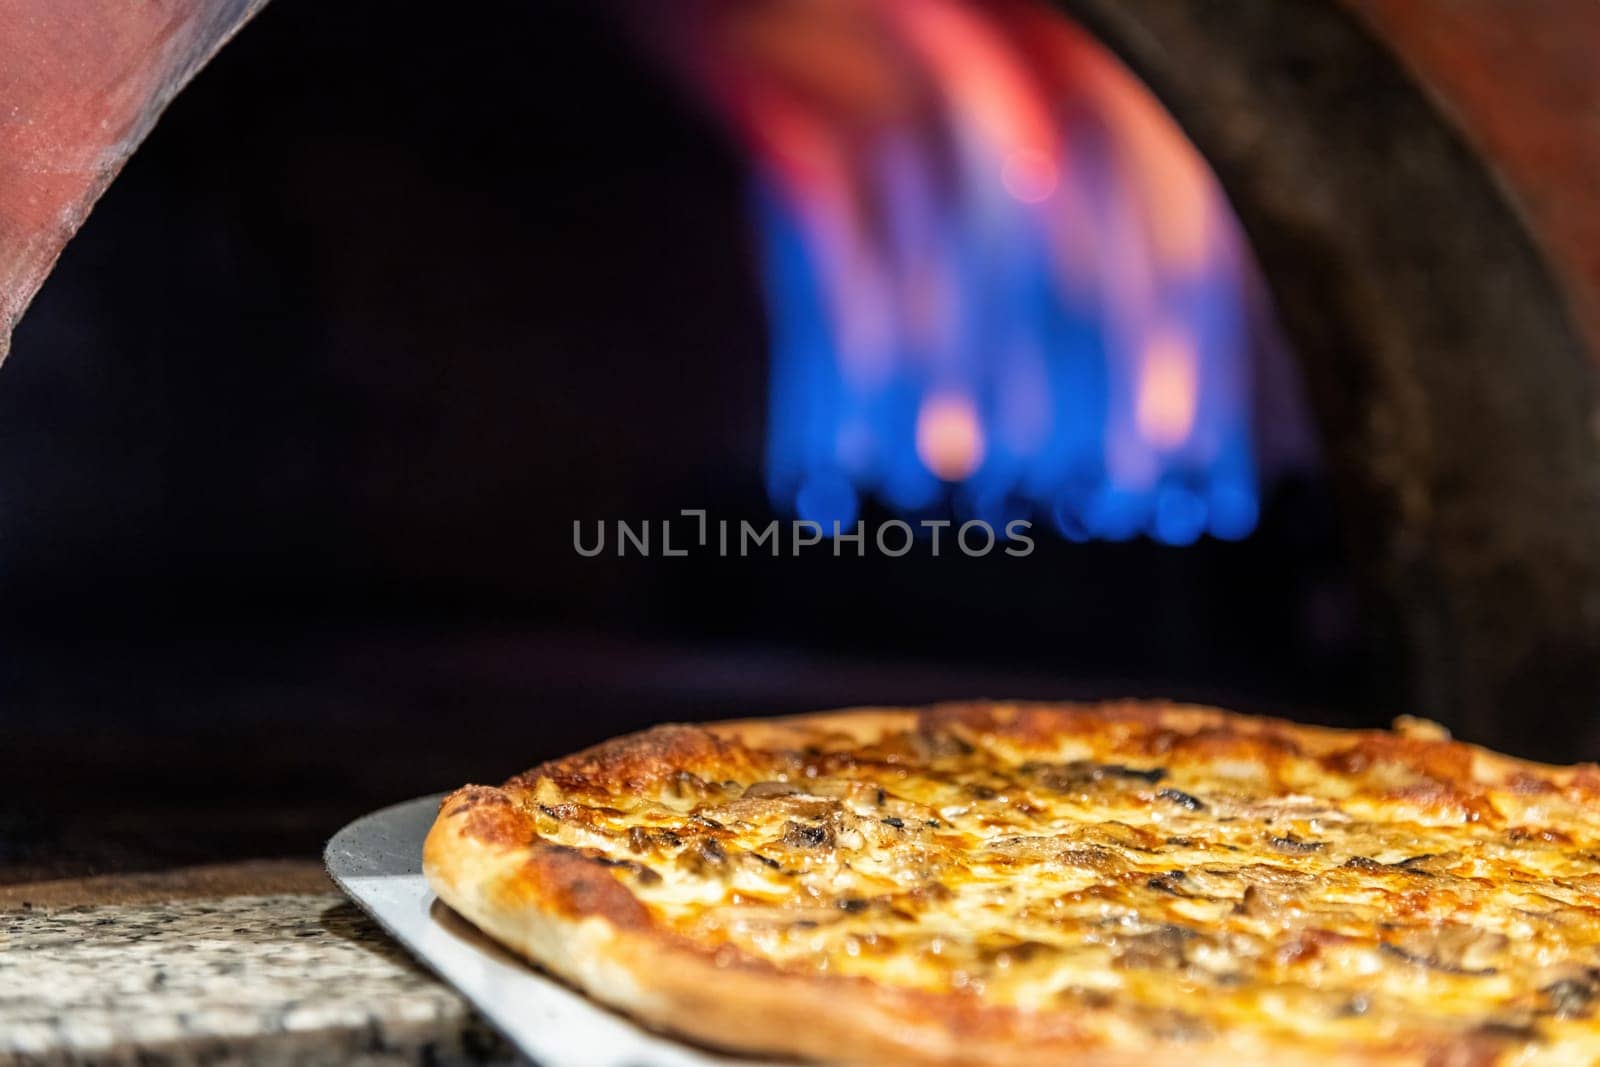 Mixed pizza fresh from the pizza oven with flames visible in the background